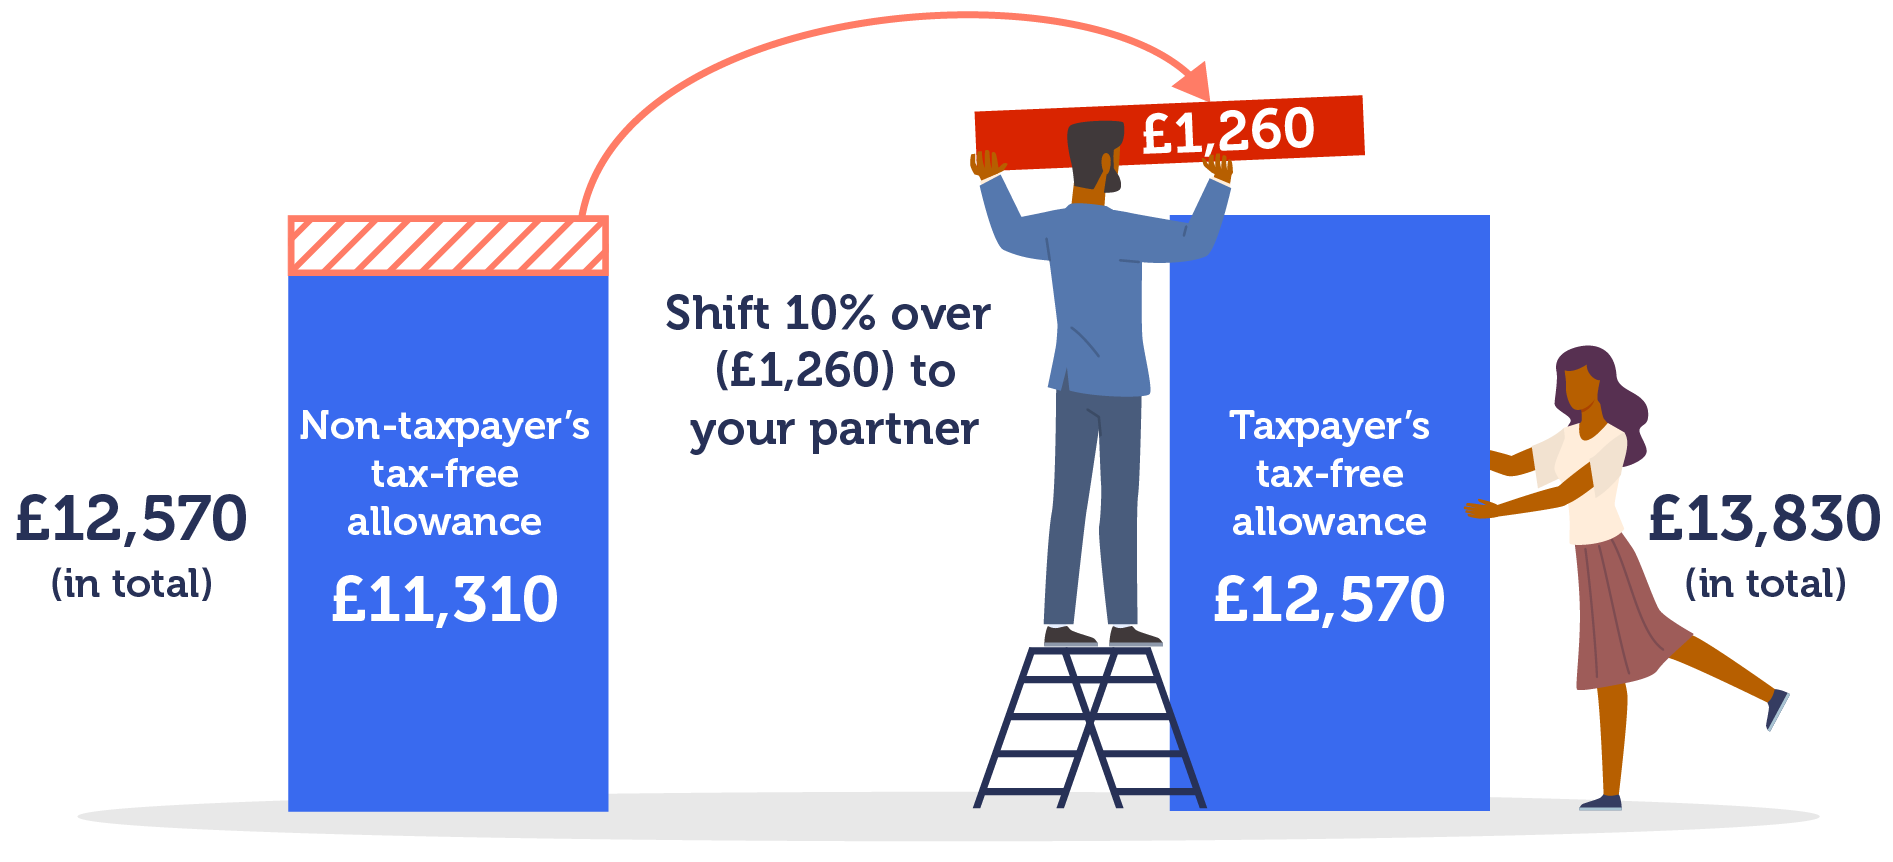 An image detailing how non-taxpayers can transfer part of their tax-free allowance to their spouse. A non-taxpayer can shift 10% or £1,260 of their £12,570 tax-free allowance over to their taxpayer spouse, which would give the taxpayer a £13,830 tax-free allowance. The image links to MSE's marriage tax allowance guide.